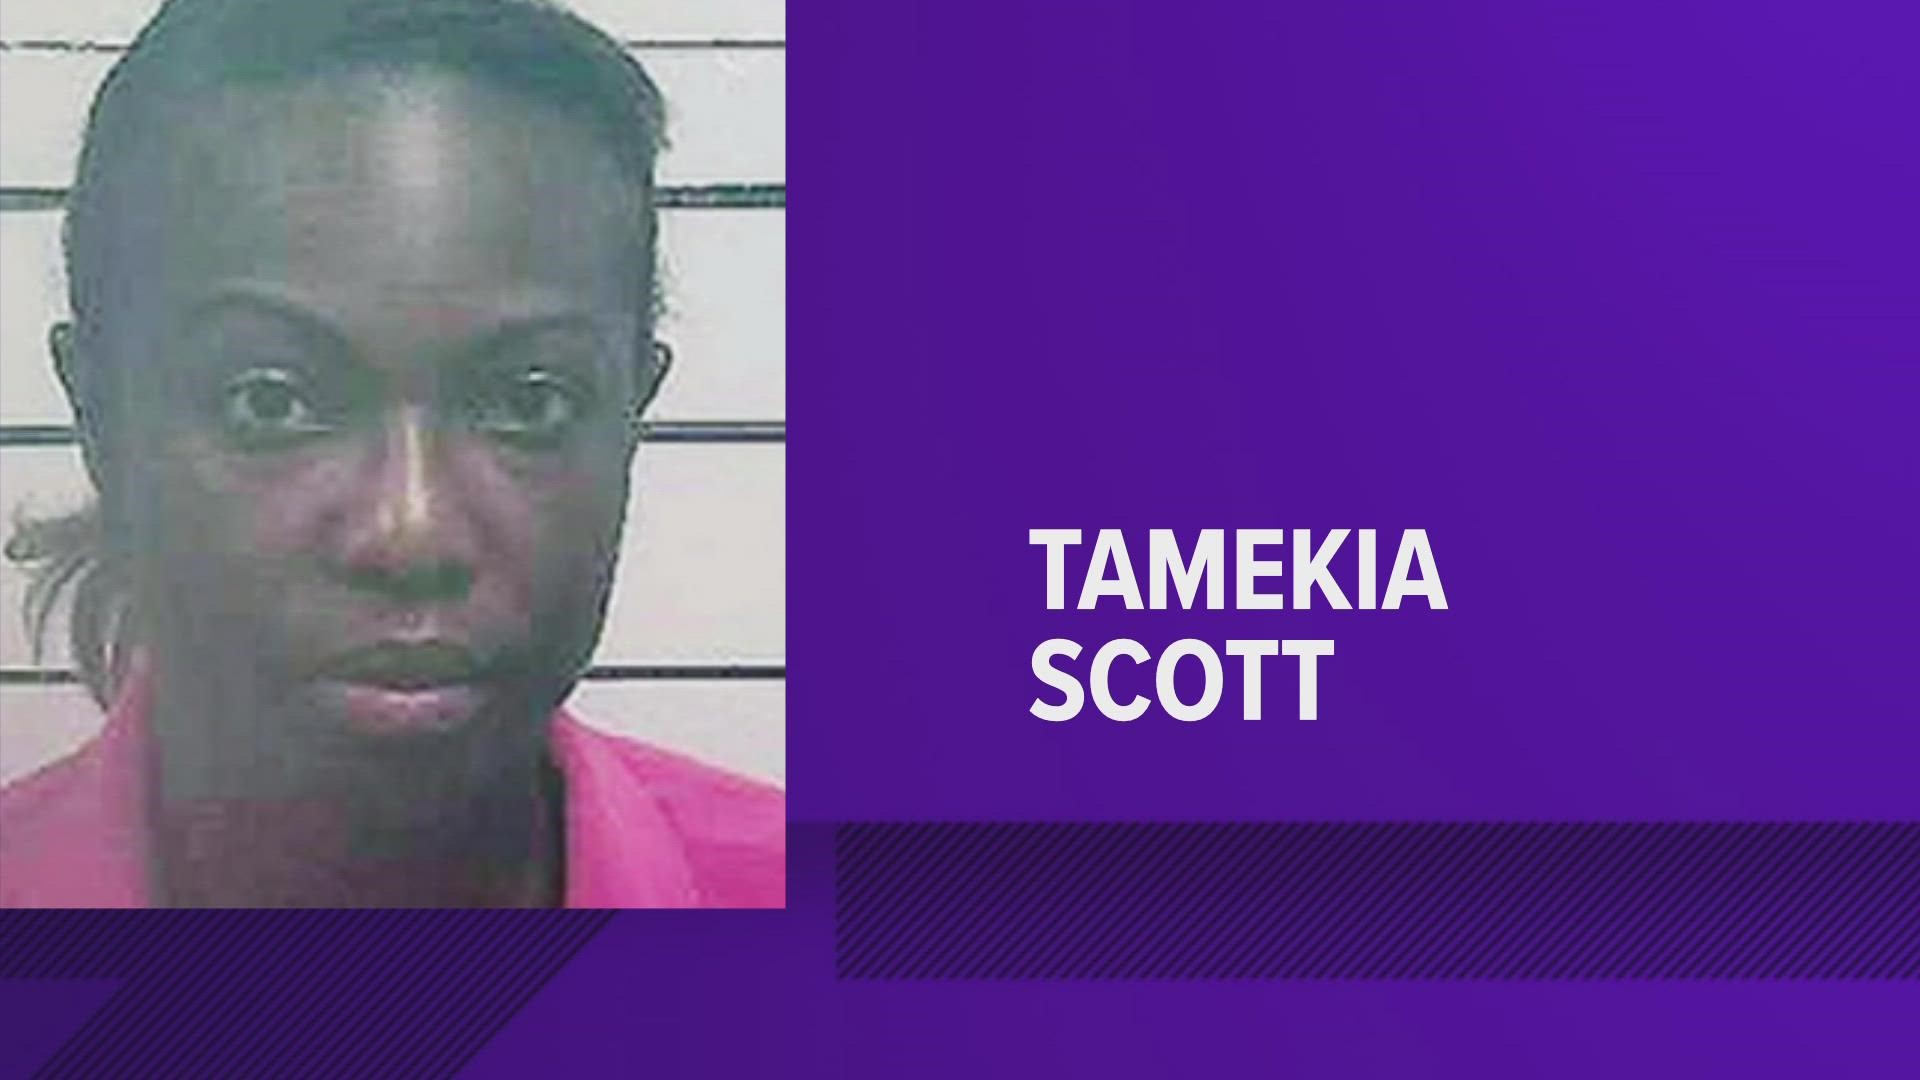 Tamekia Scott repeatedly stabbed the Hernando postmaster with a screwdriver on July 13, 2021, court documents said.